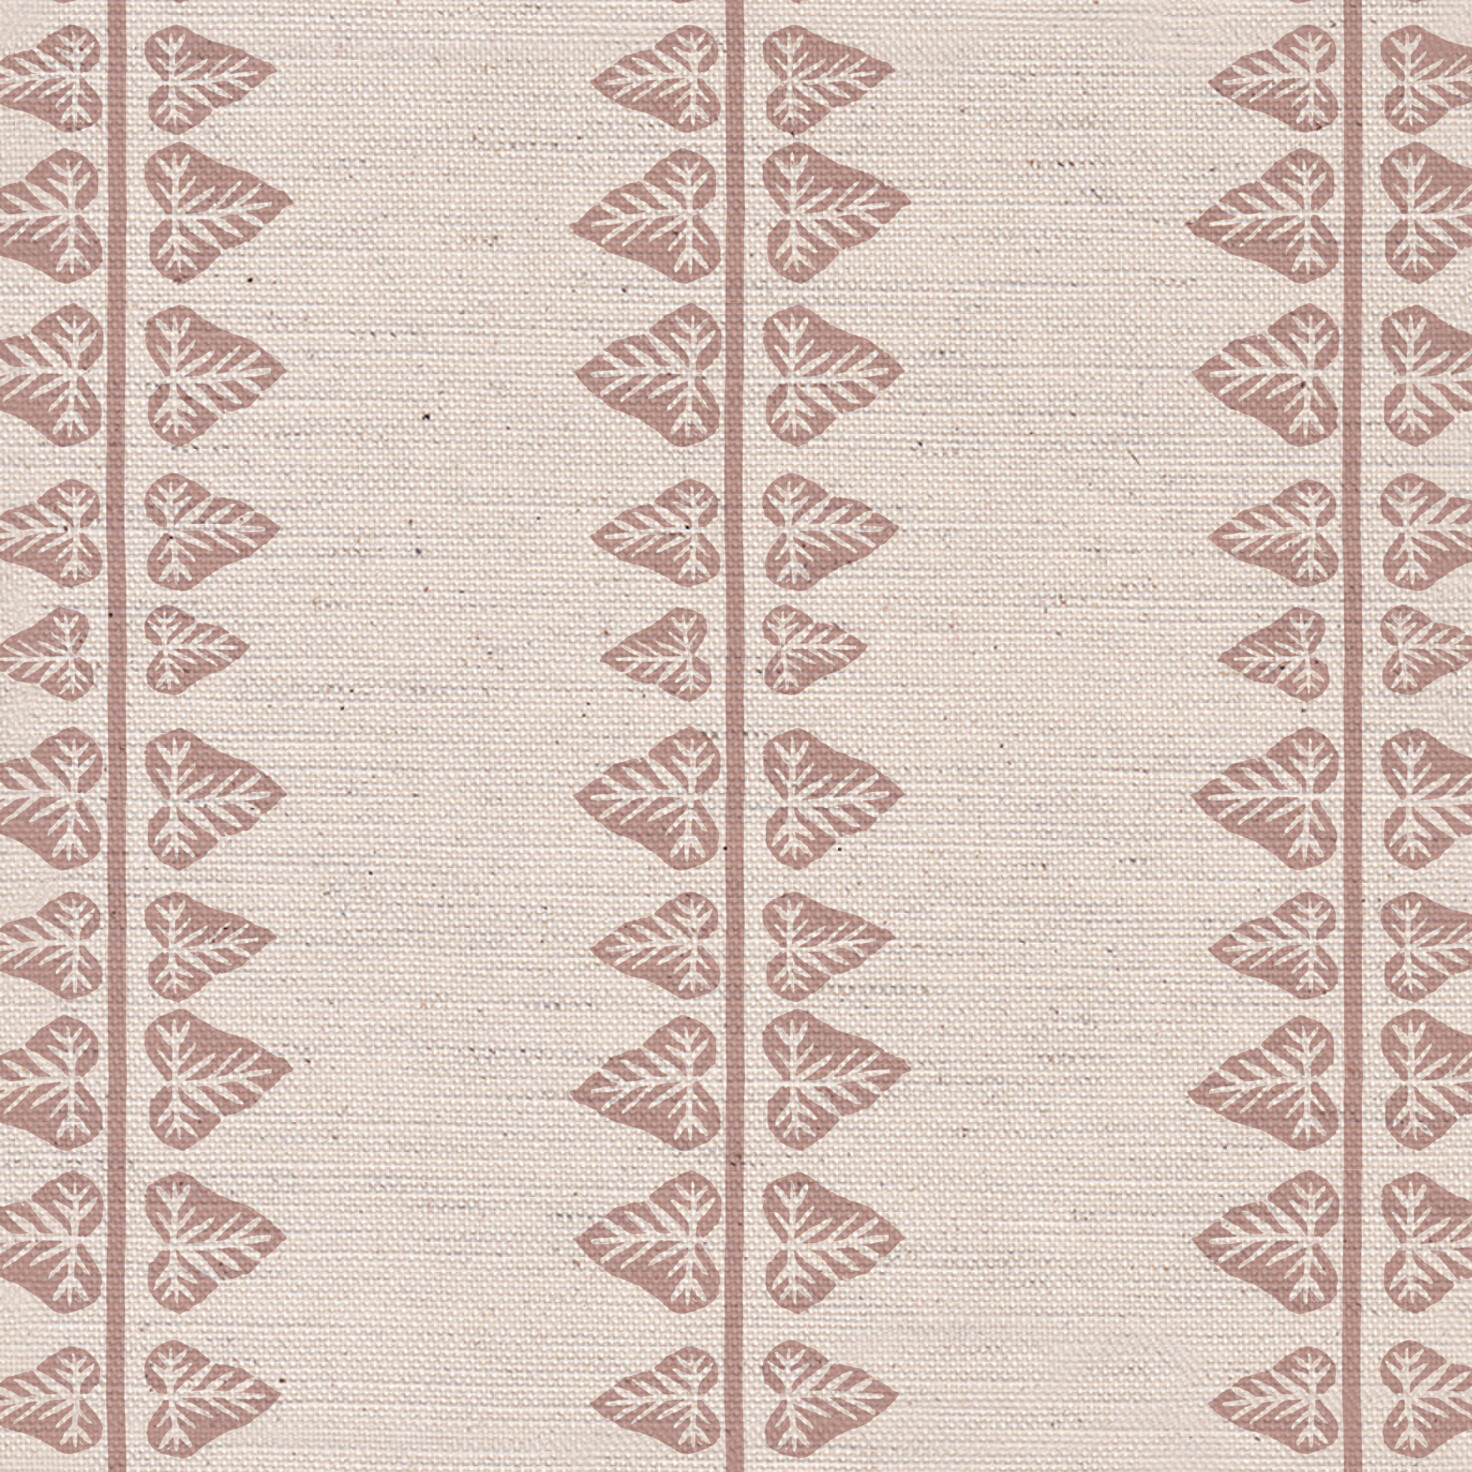 Ivy Fabric in Pink on Natural Background